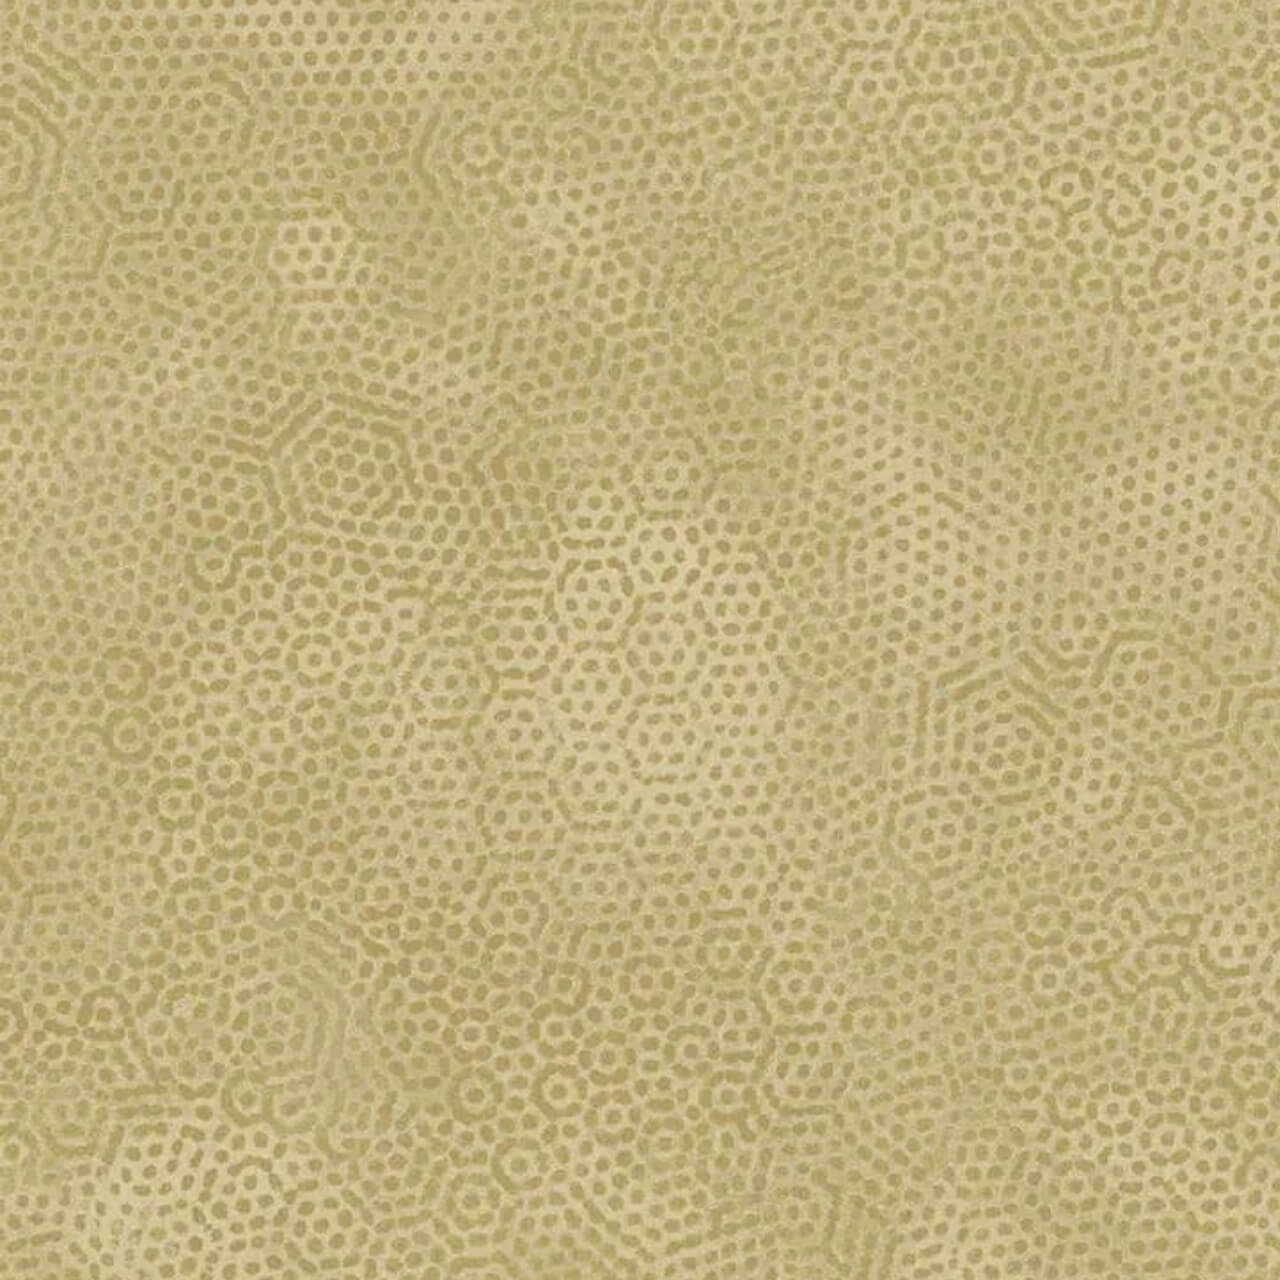 Close-up of Andover Fabrics' "Taffytan" from the Dimples collection, showcasing the distinctive beige tone-on-tone dimple texture.